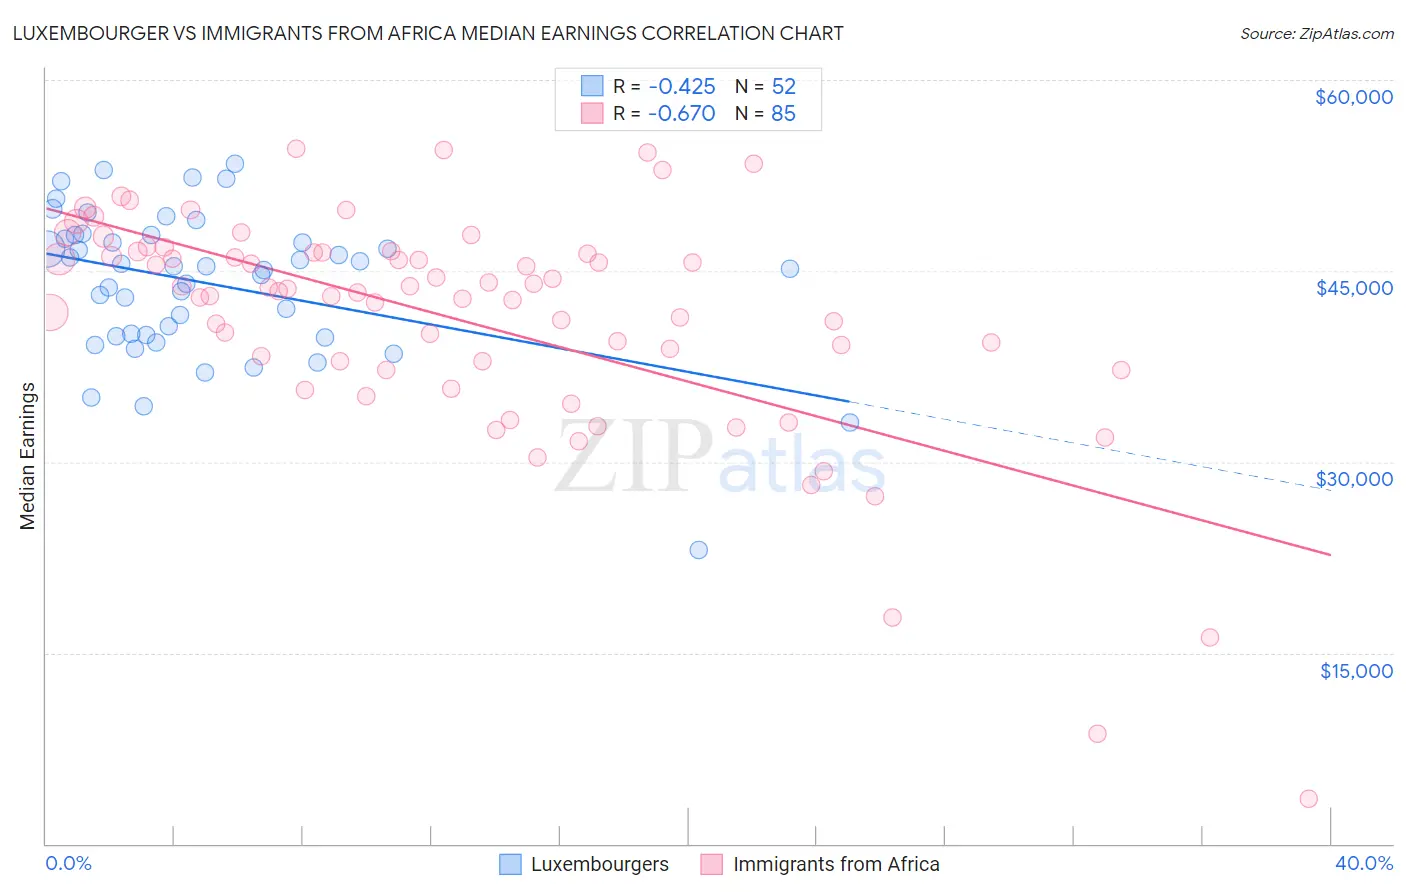 Luxembourger vs Immigrants from Africa Median Earnings